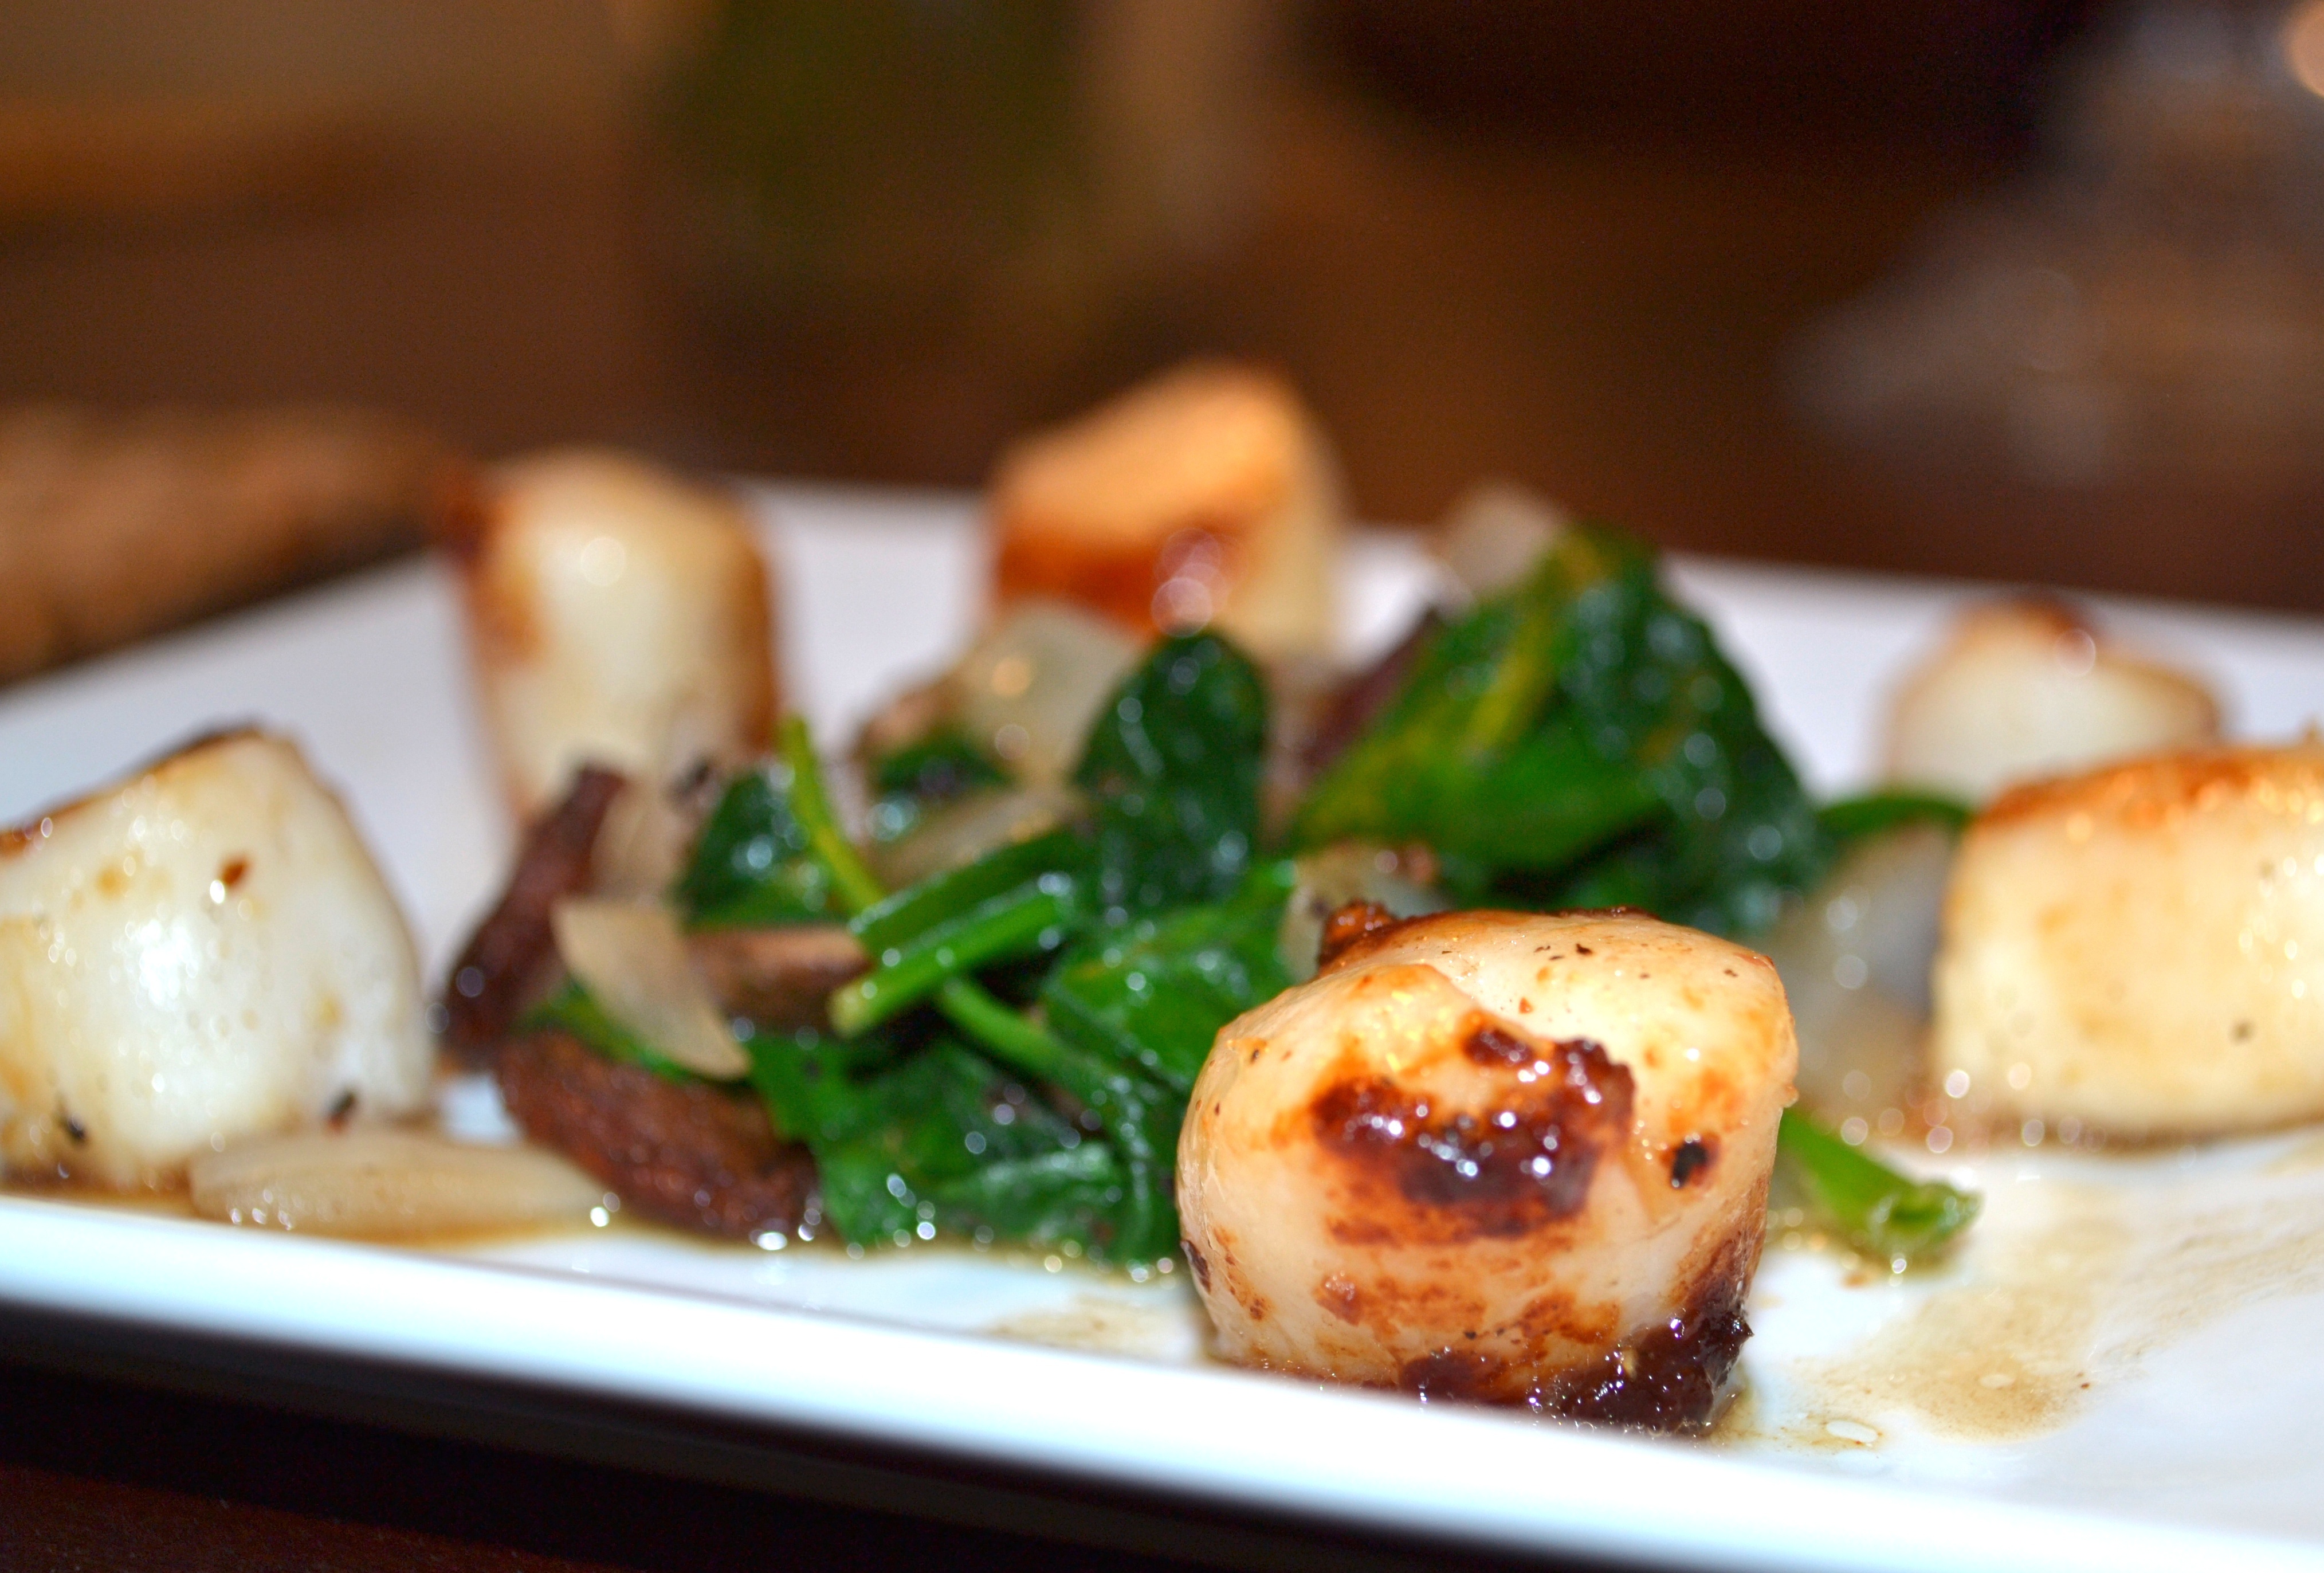 Seared Sea Scallops with an Apple Cider and Balsamic Vinegar Glaze